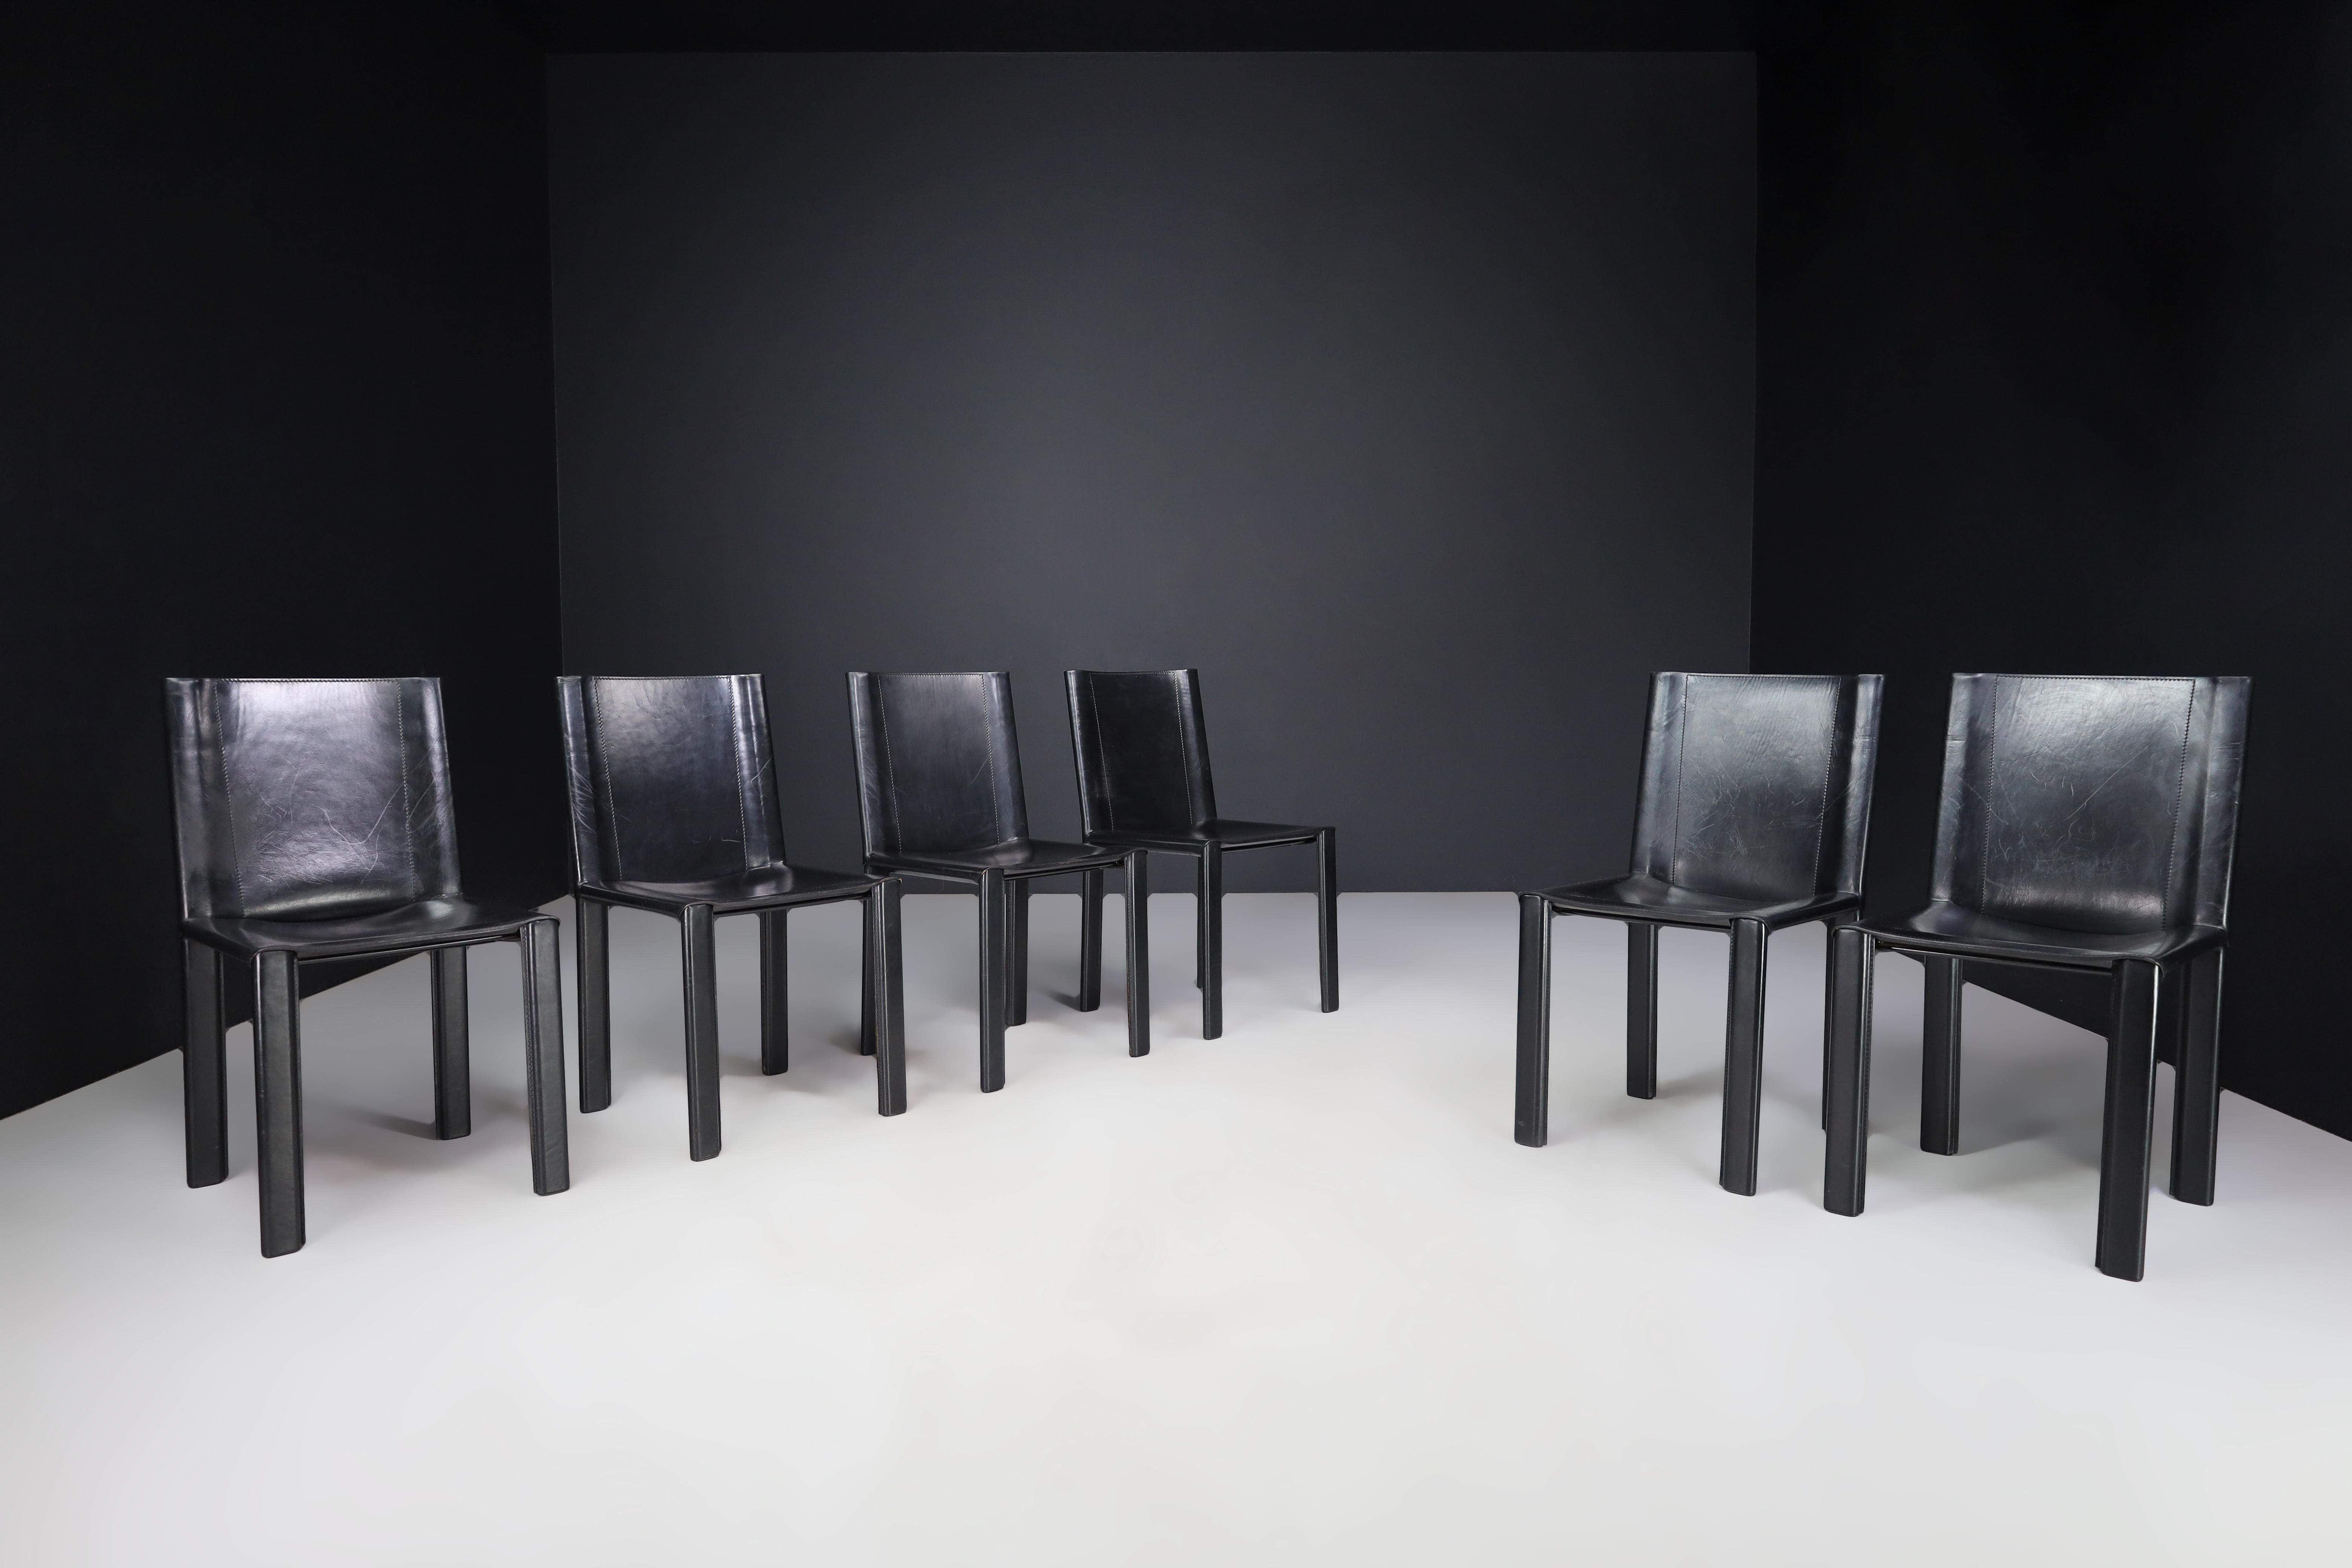 Carlo Bartoli Black Leather dining room chairs for Matteo Grassi Italy 1980s

This set of six dining chairs, named 